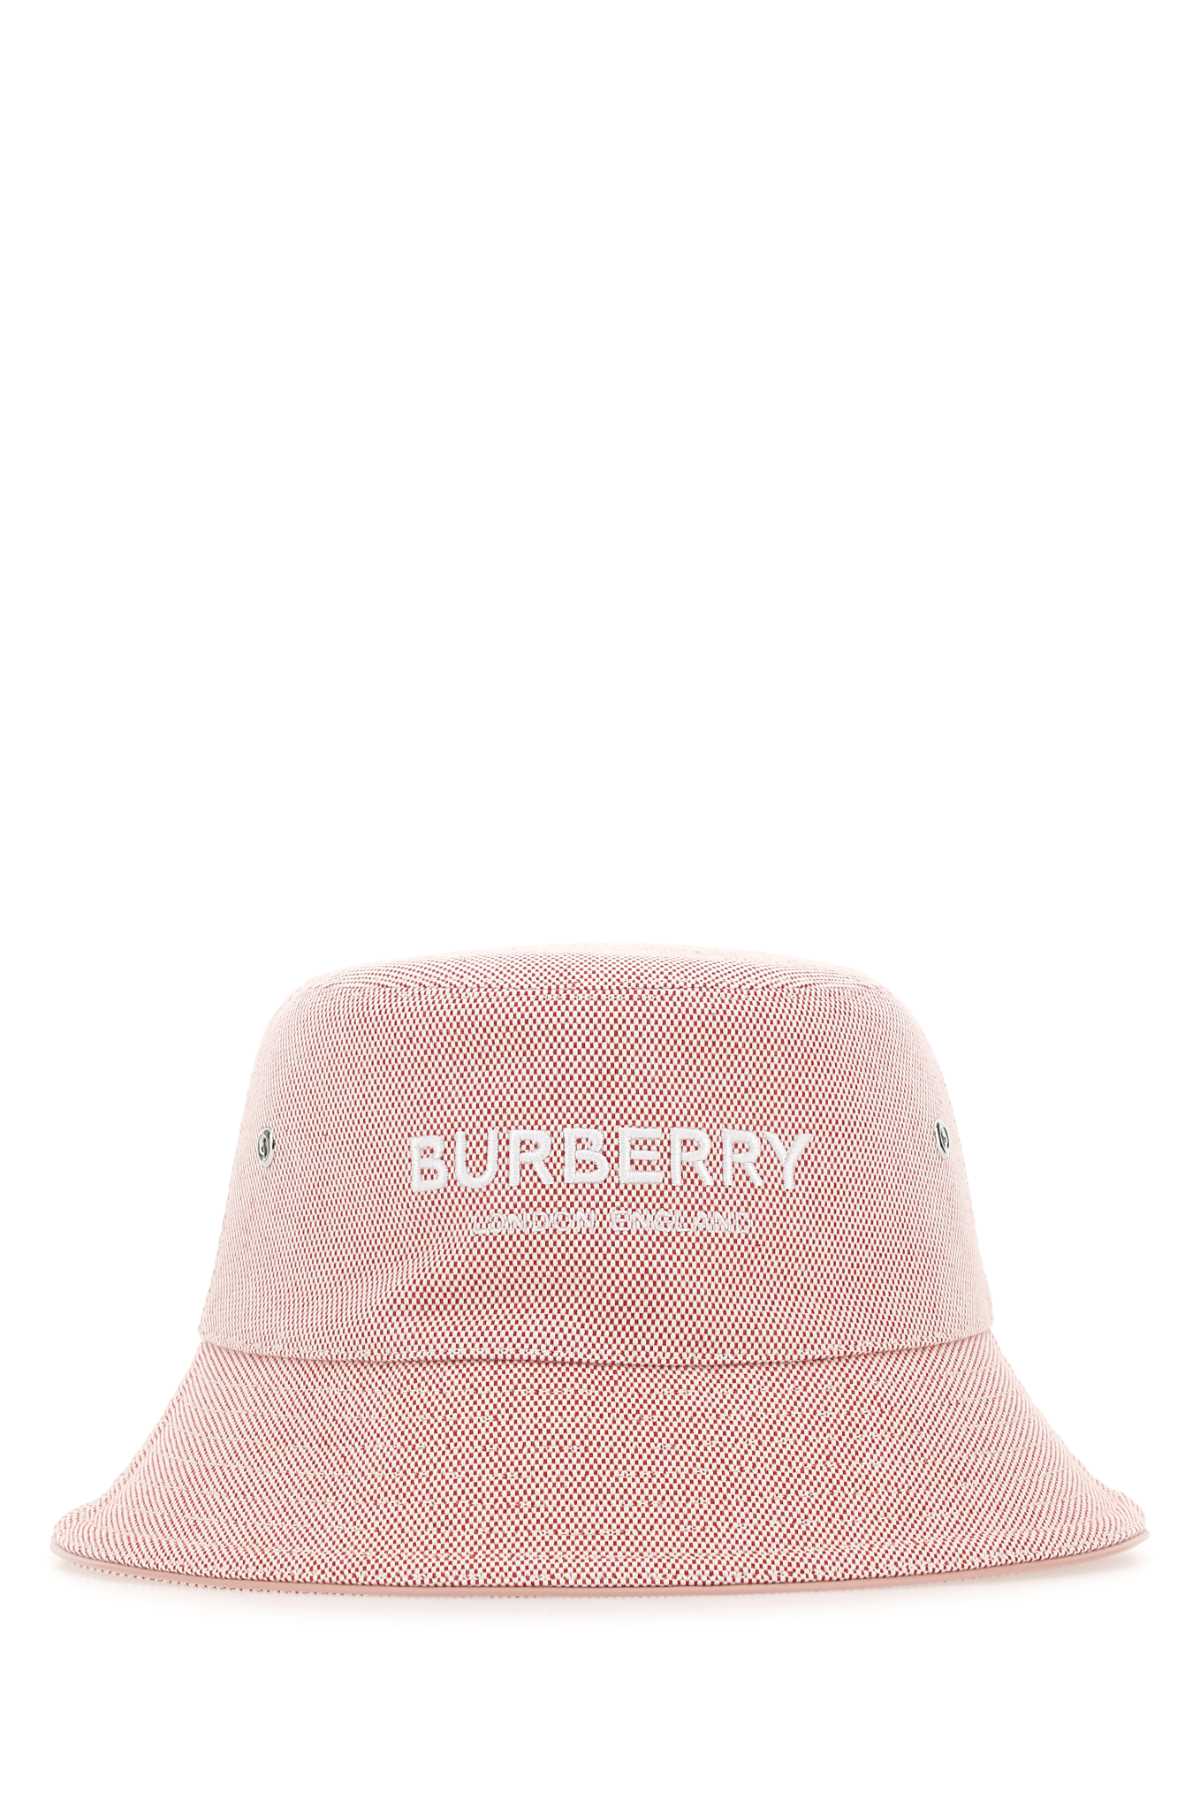 Burberry Pink Cotton Hat